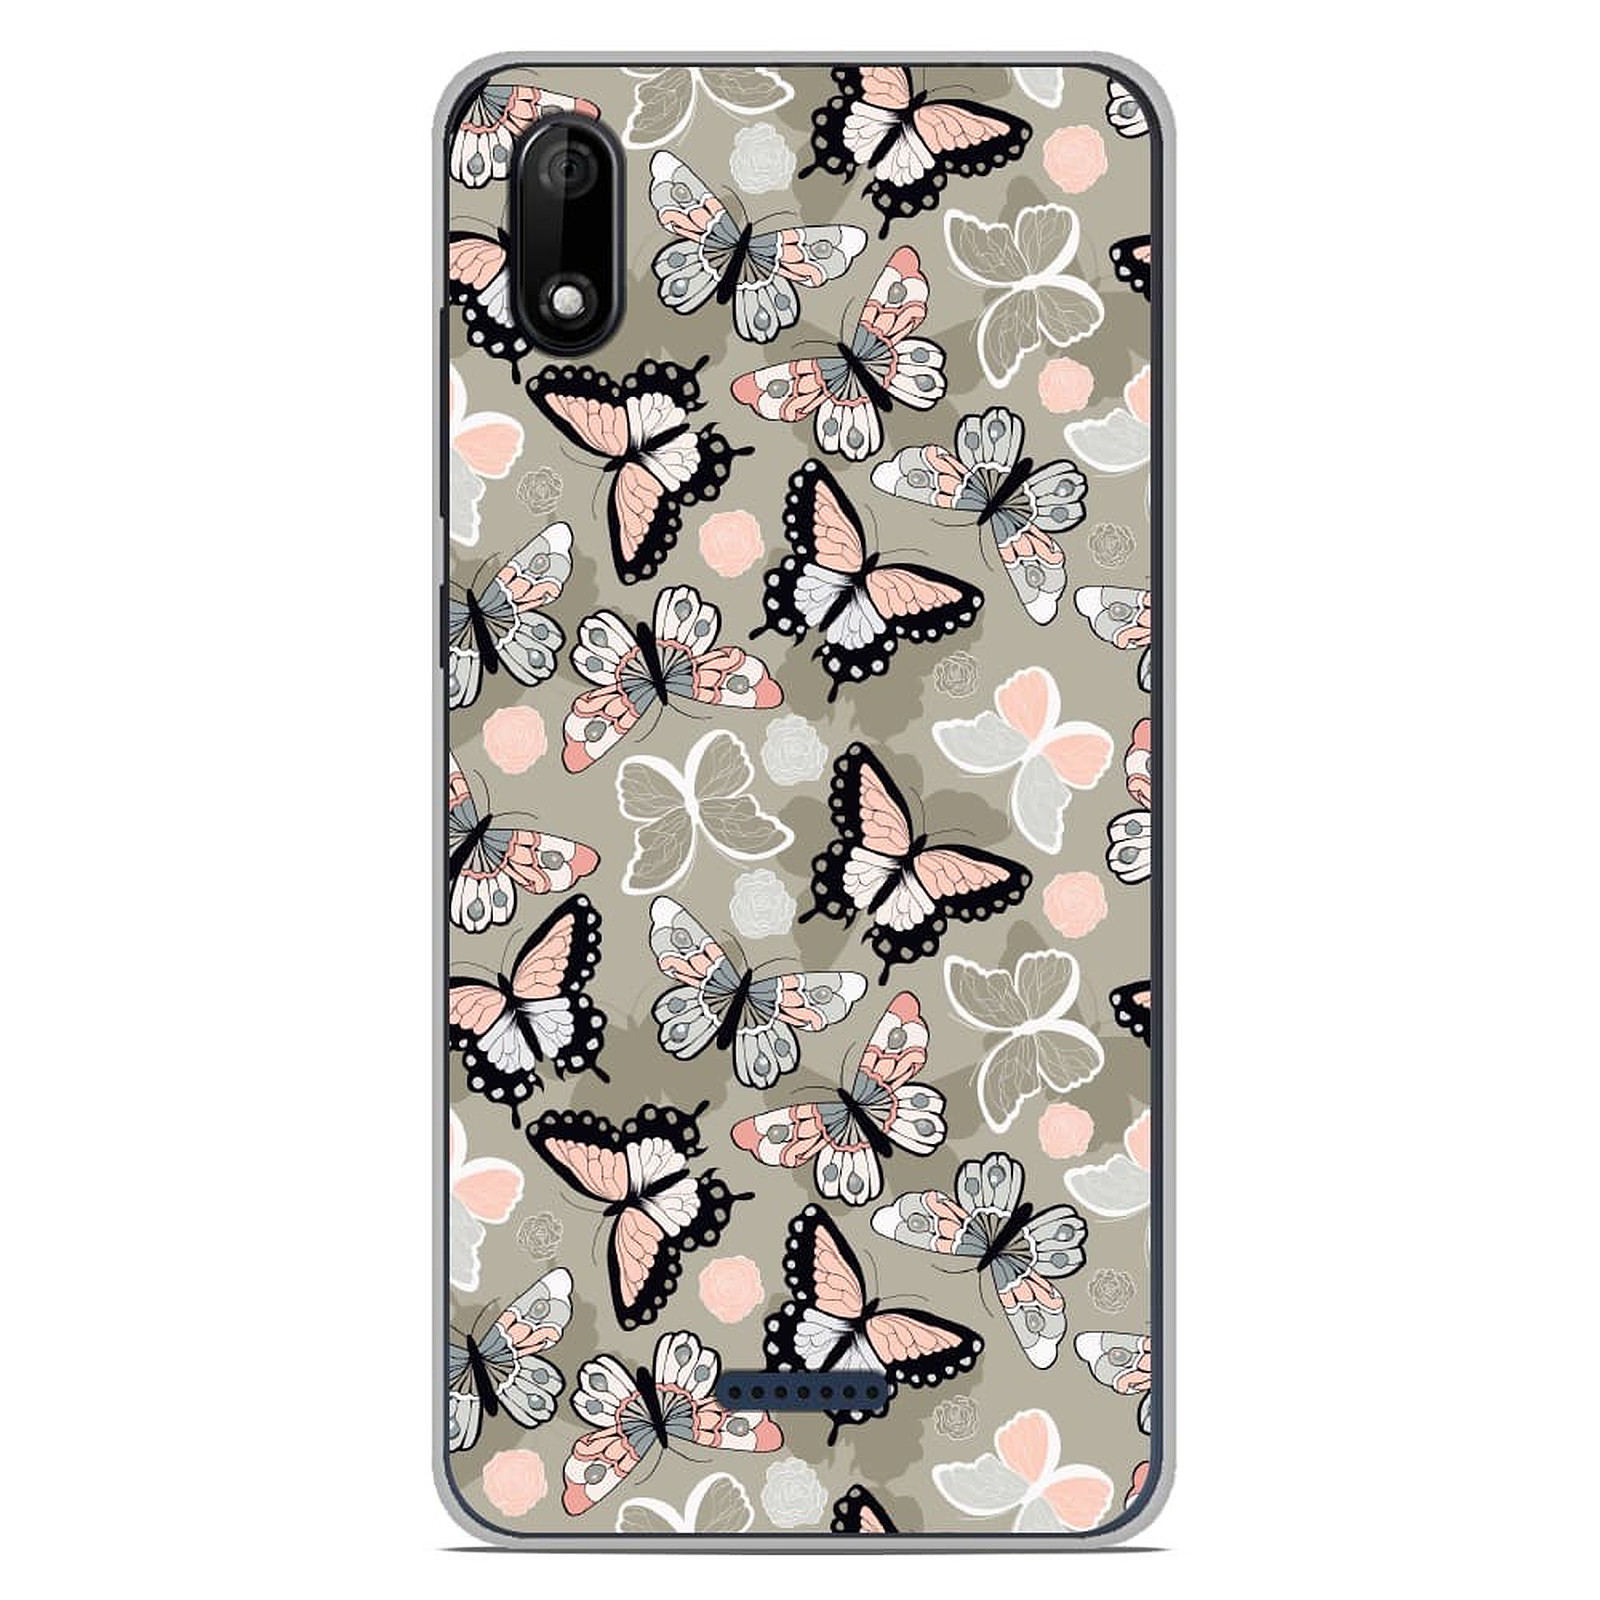 1001 Coques Coque silicone gel Wiko Y50 motif Papillons Vintage - Coque telephone 1001Coques